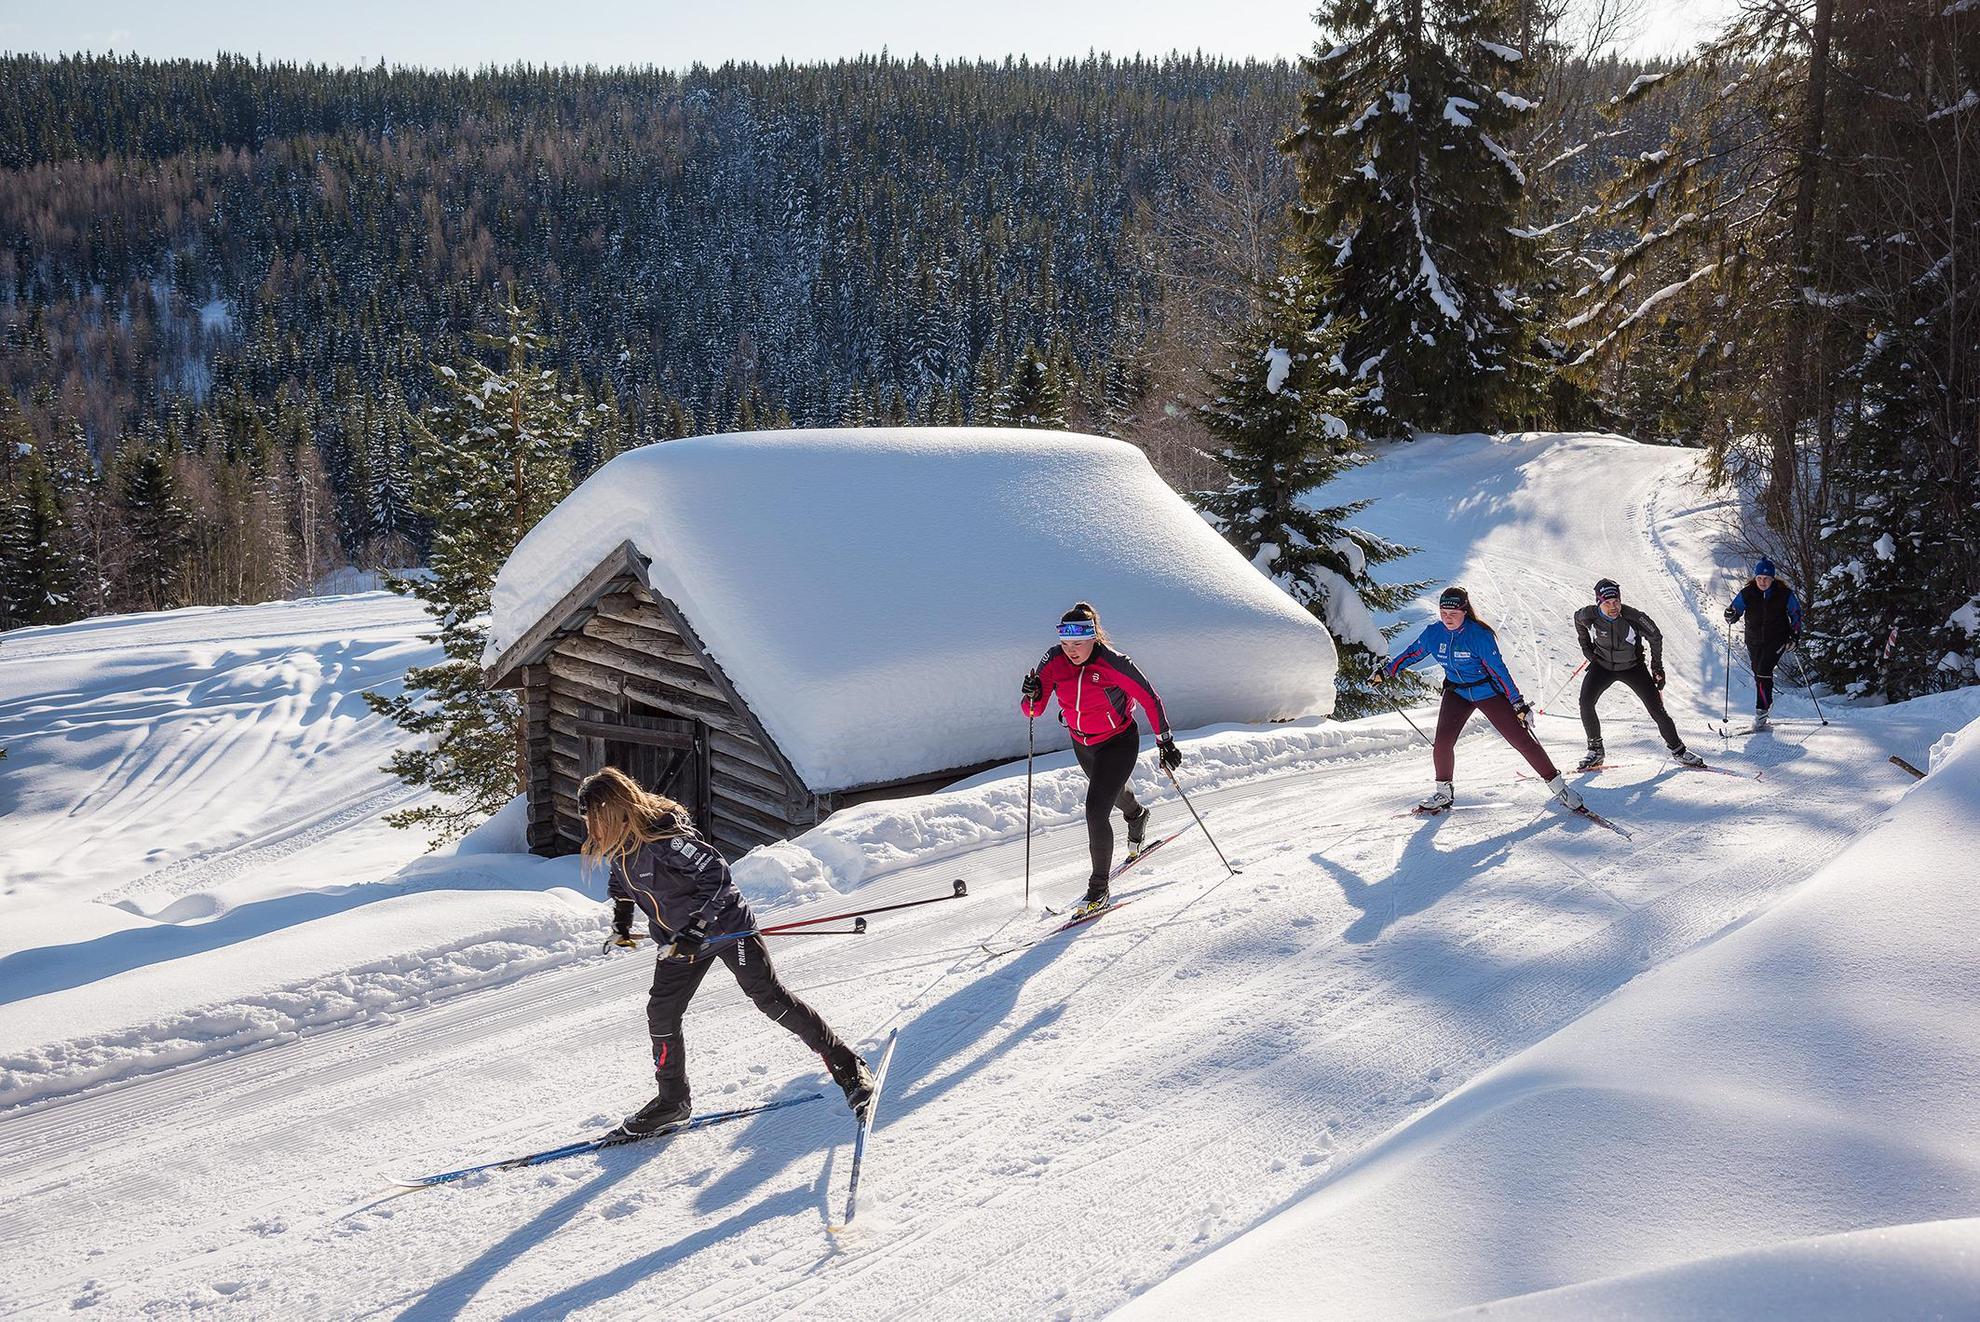 Five people are cross country skiing up a hill a sunny day during winter.